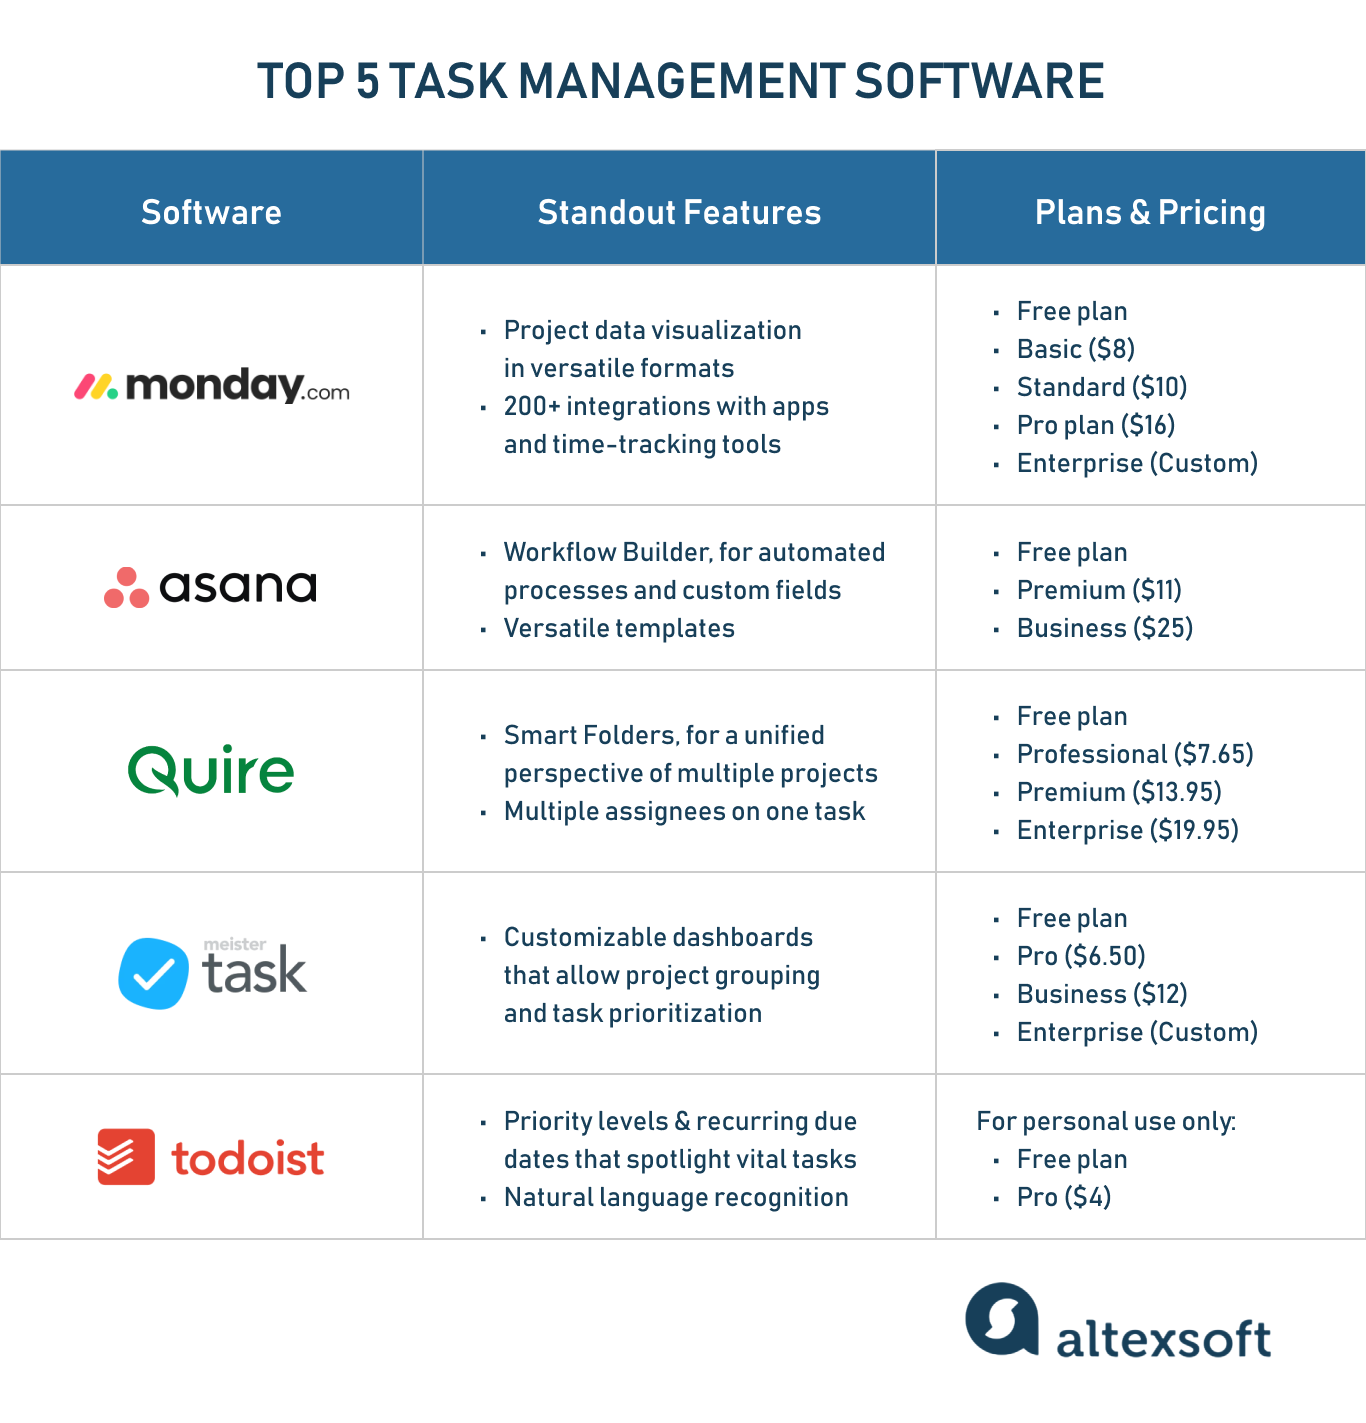 A table that shows a general overview of top 5 task management software highlighting standout features and pricing plans of each tool